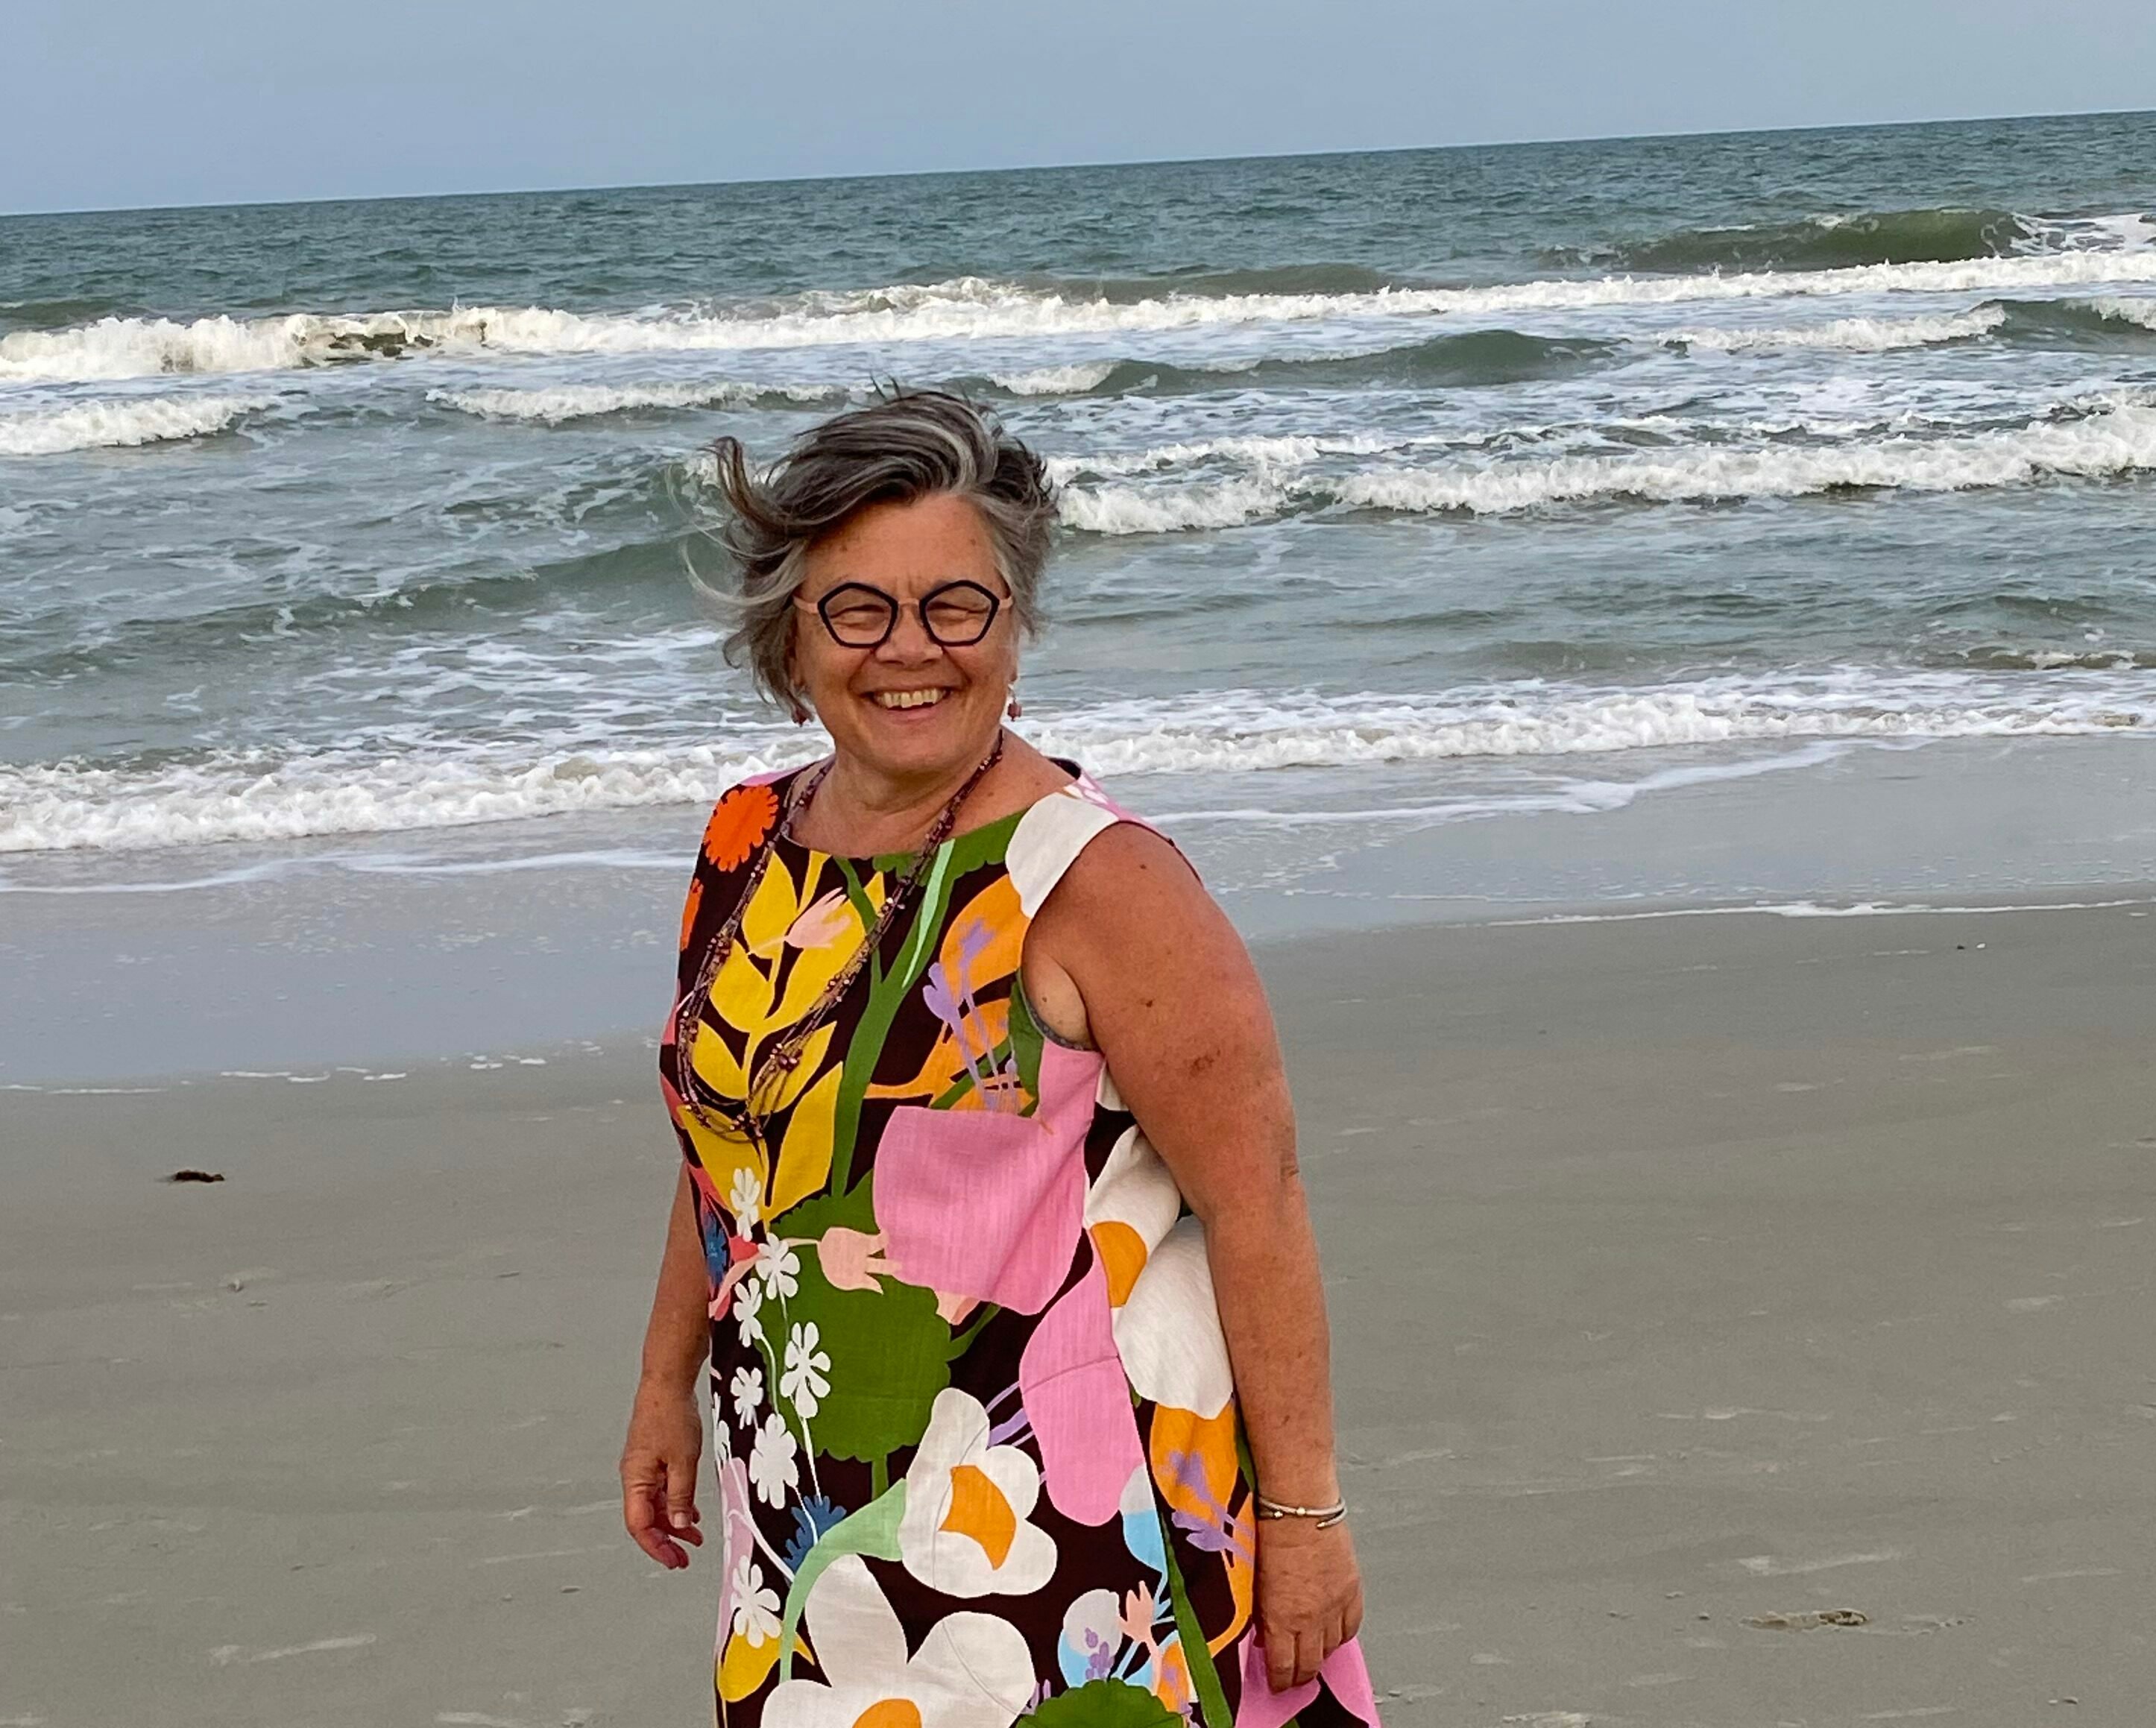 Tamela Rich on the beach with the wind in her hair. She's wearing a dress with big flowers and her eyeglasses.